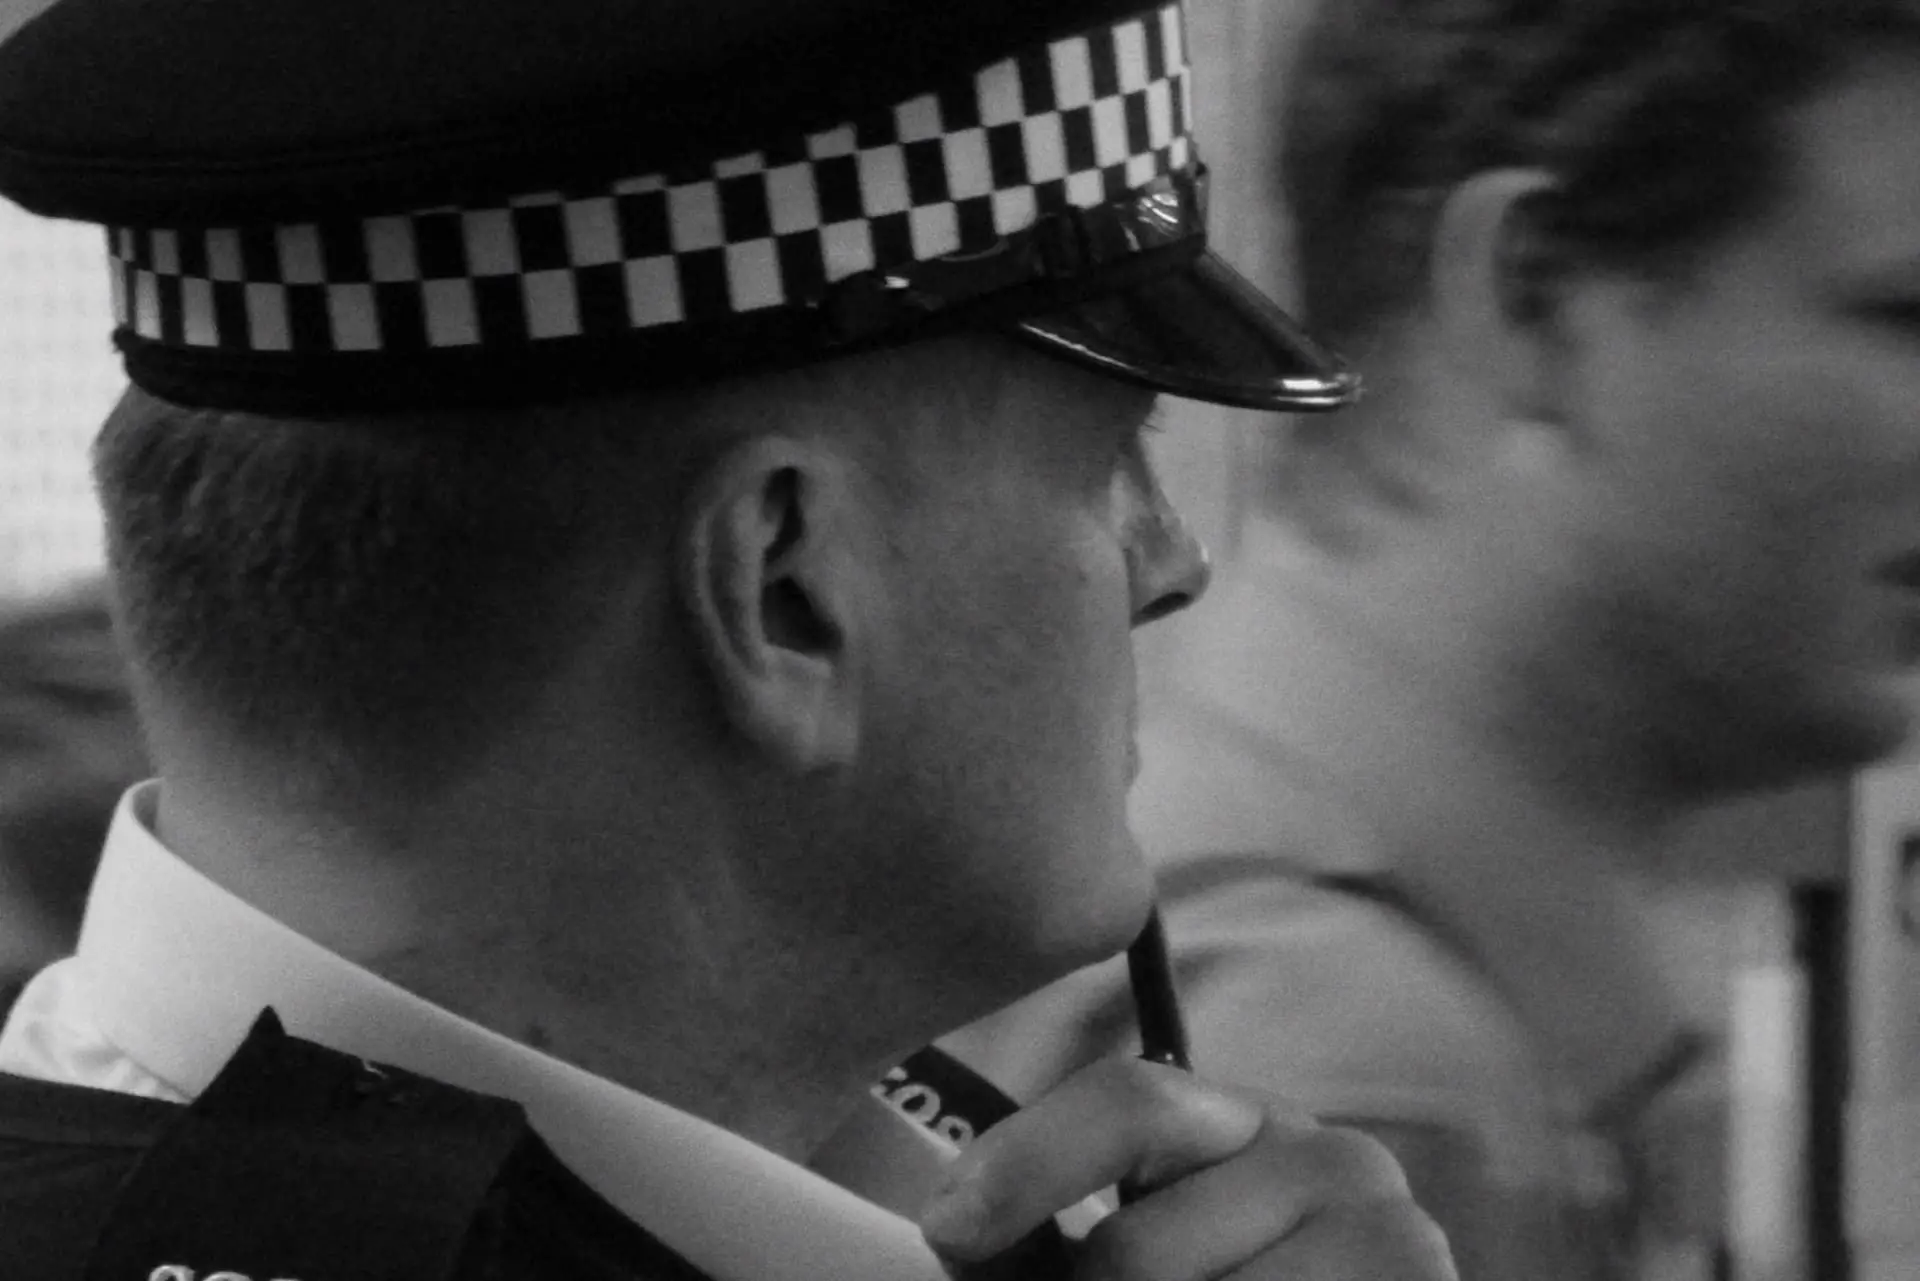 police officer (photo in black and white)